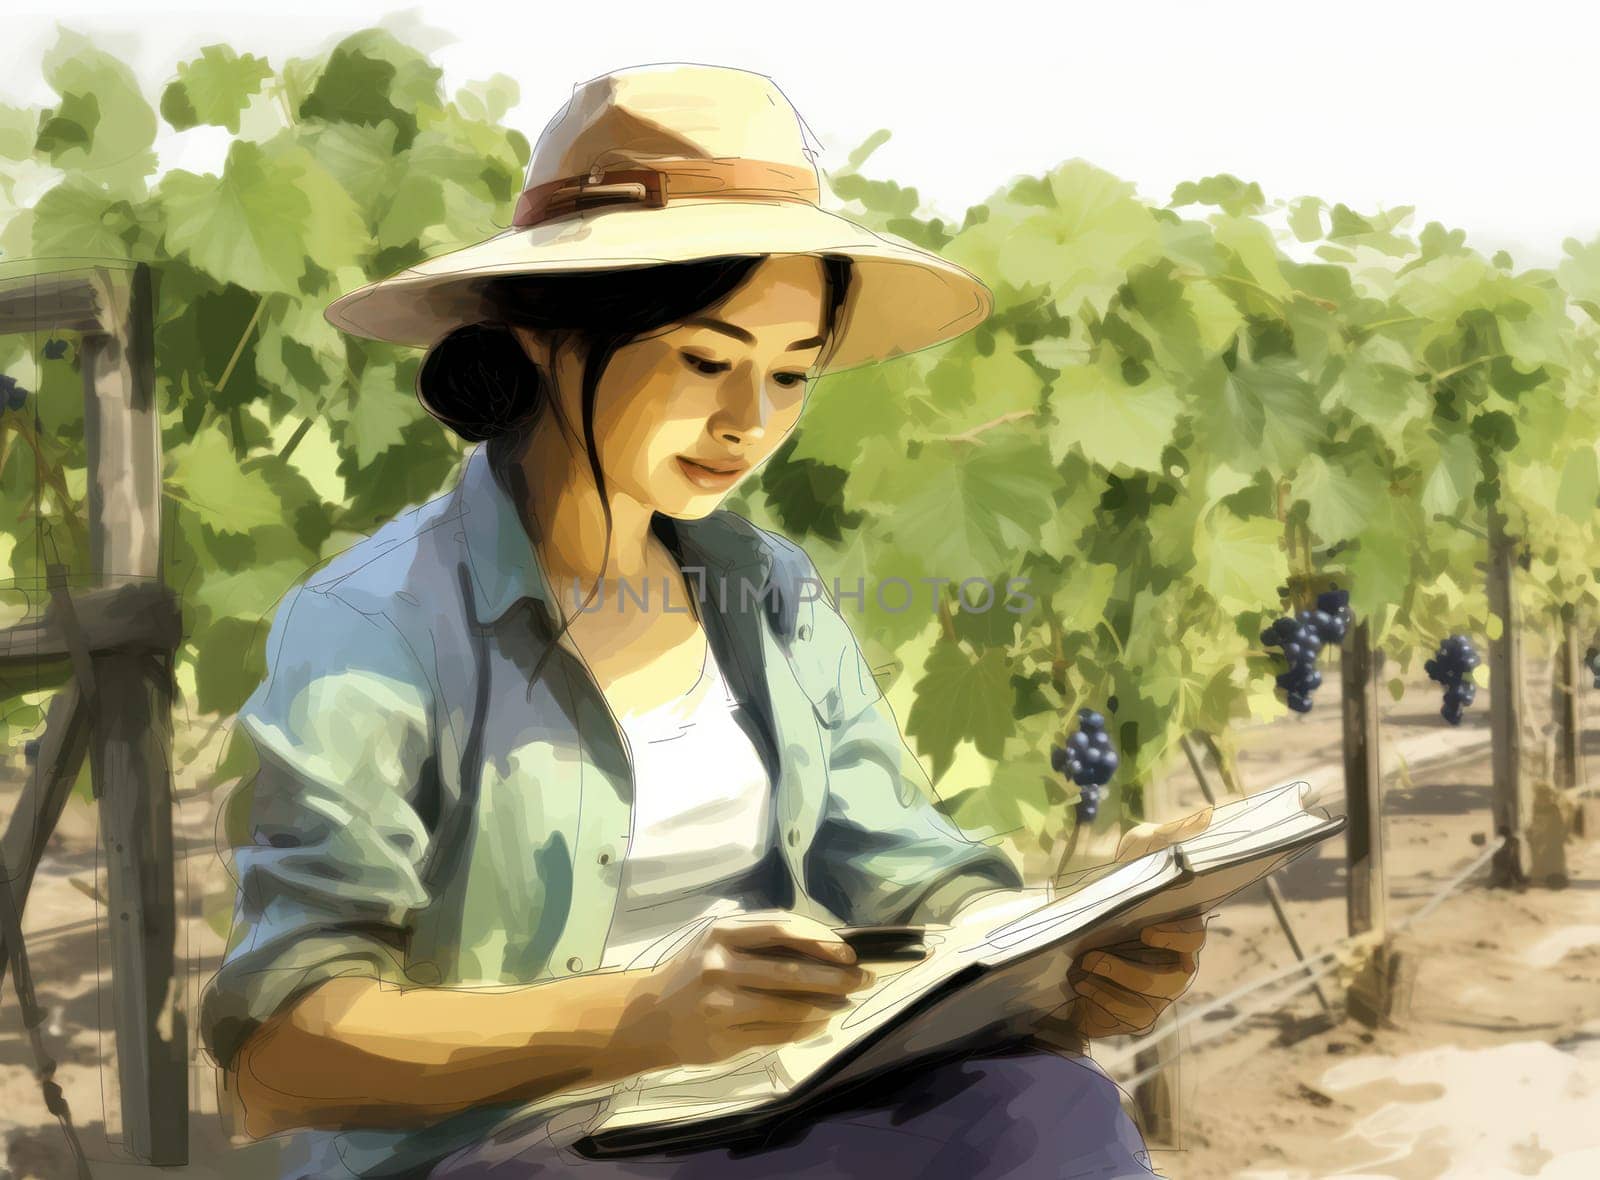 Portrait of a Young Woman, a Professional Farmer, Picking Fresh Grapes in a Sunny Organic Vineyard Field by Vichizh